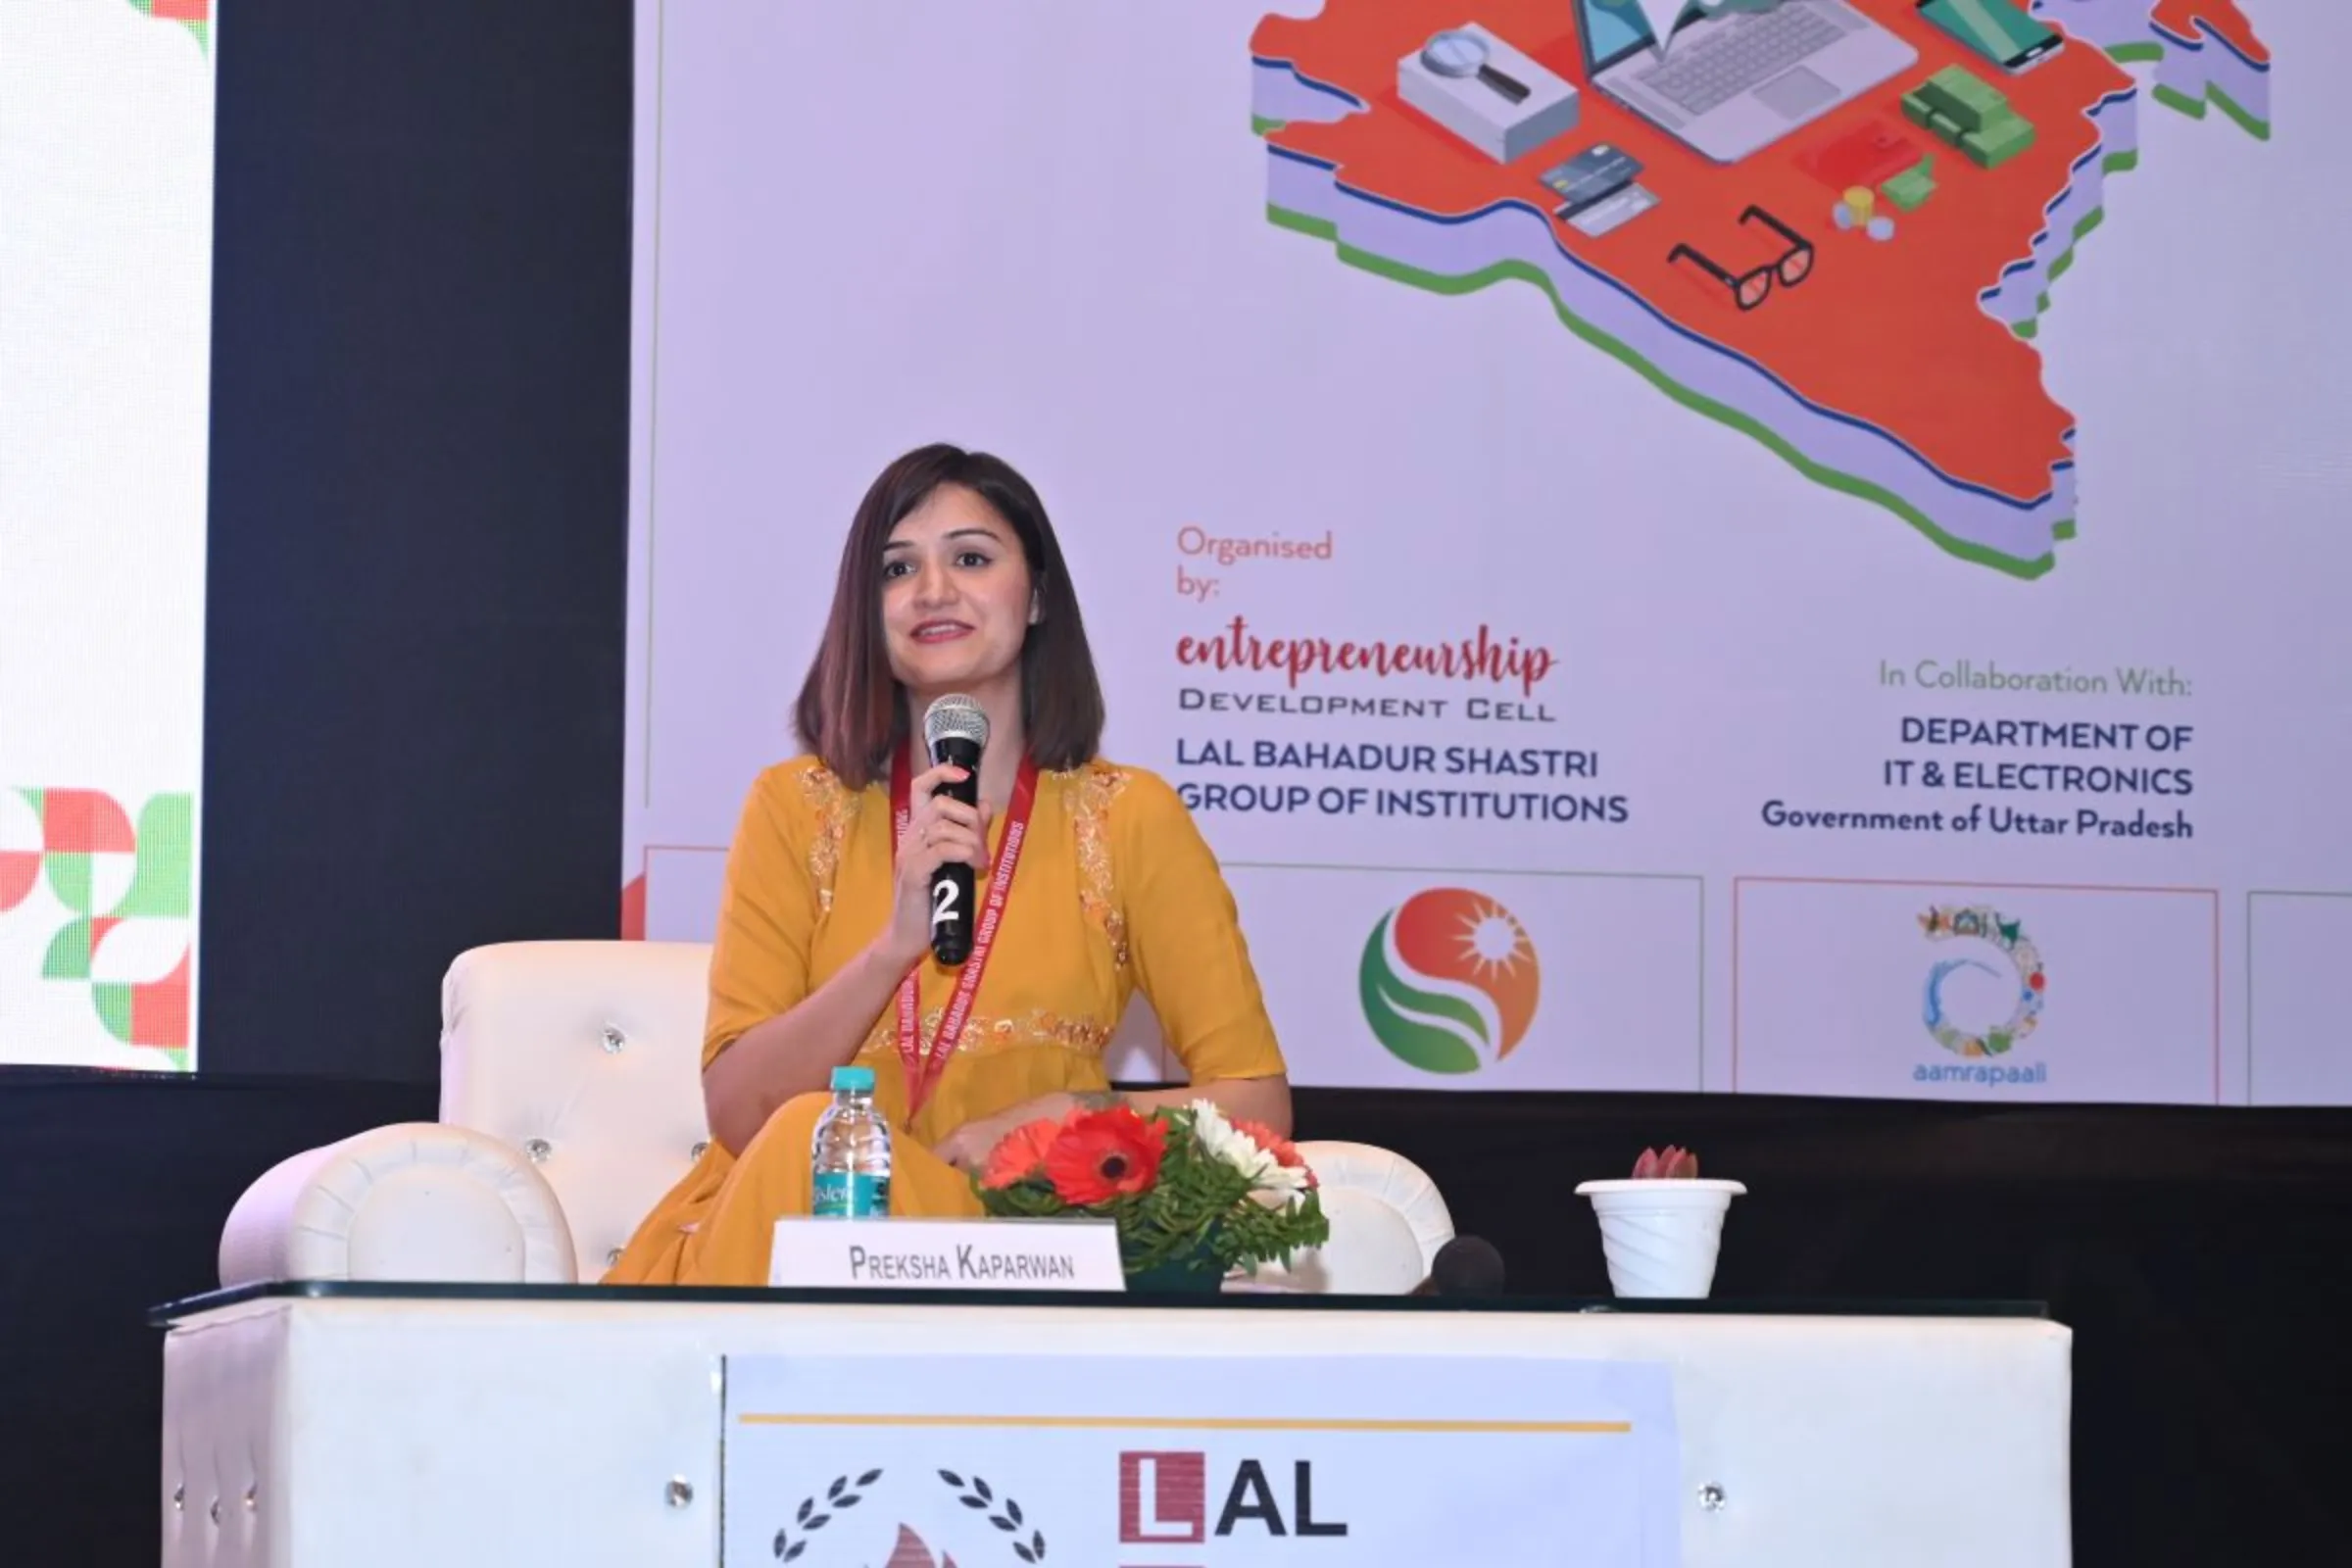 Preksha Kaparwan, co-founder of Alphaa AI and Super AI, speaking about entrepreneurship in Lucknow, Uttar Pradesh at an event organized by the government in early 2020. SuperAI/Handout via Thomson Reuters Foundation